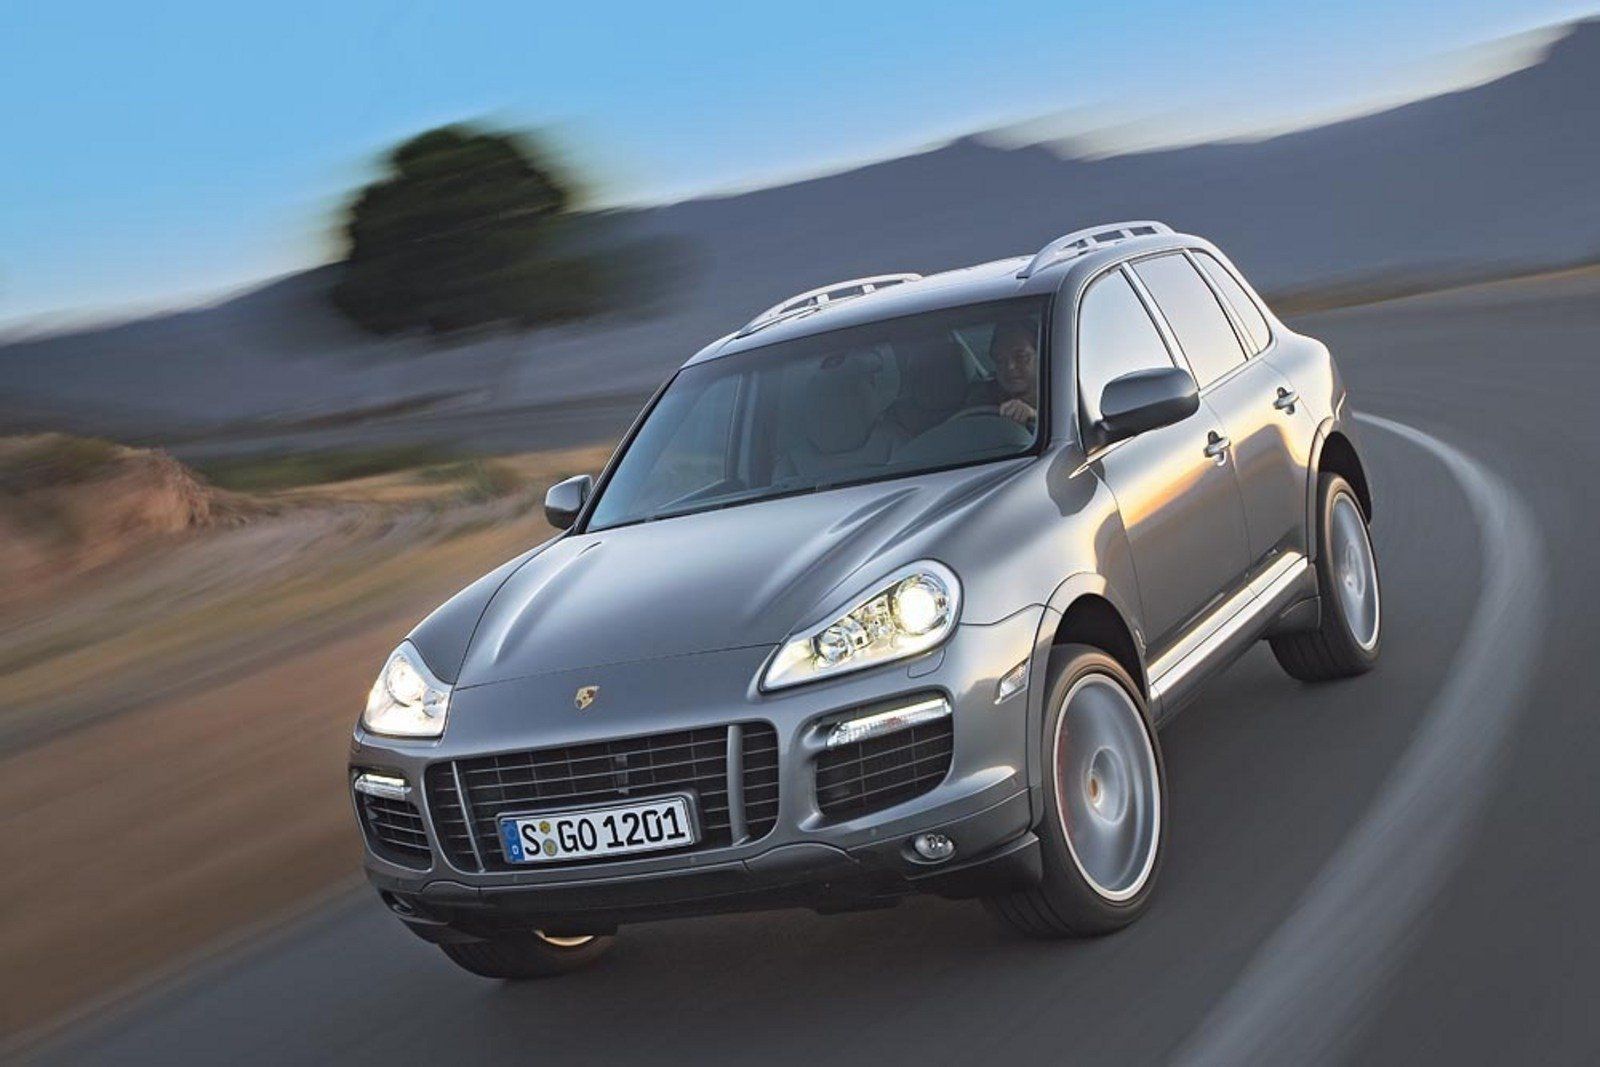 2008 Porsche Cayenne Turbo 0-60 Times, Top Speed, Specs, Quarter Mile, And Wallpapers - Mycarspecs United States / Usa